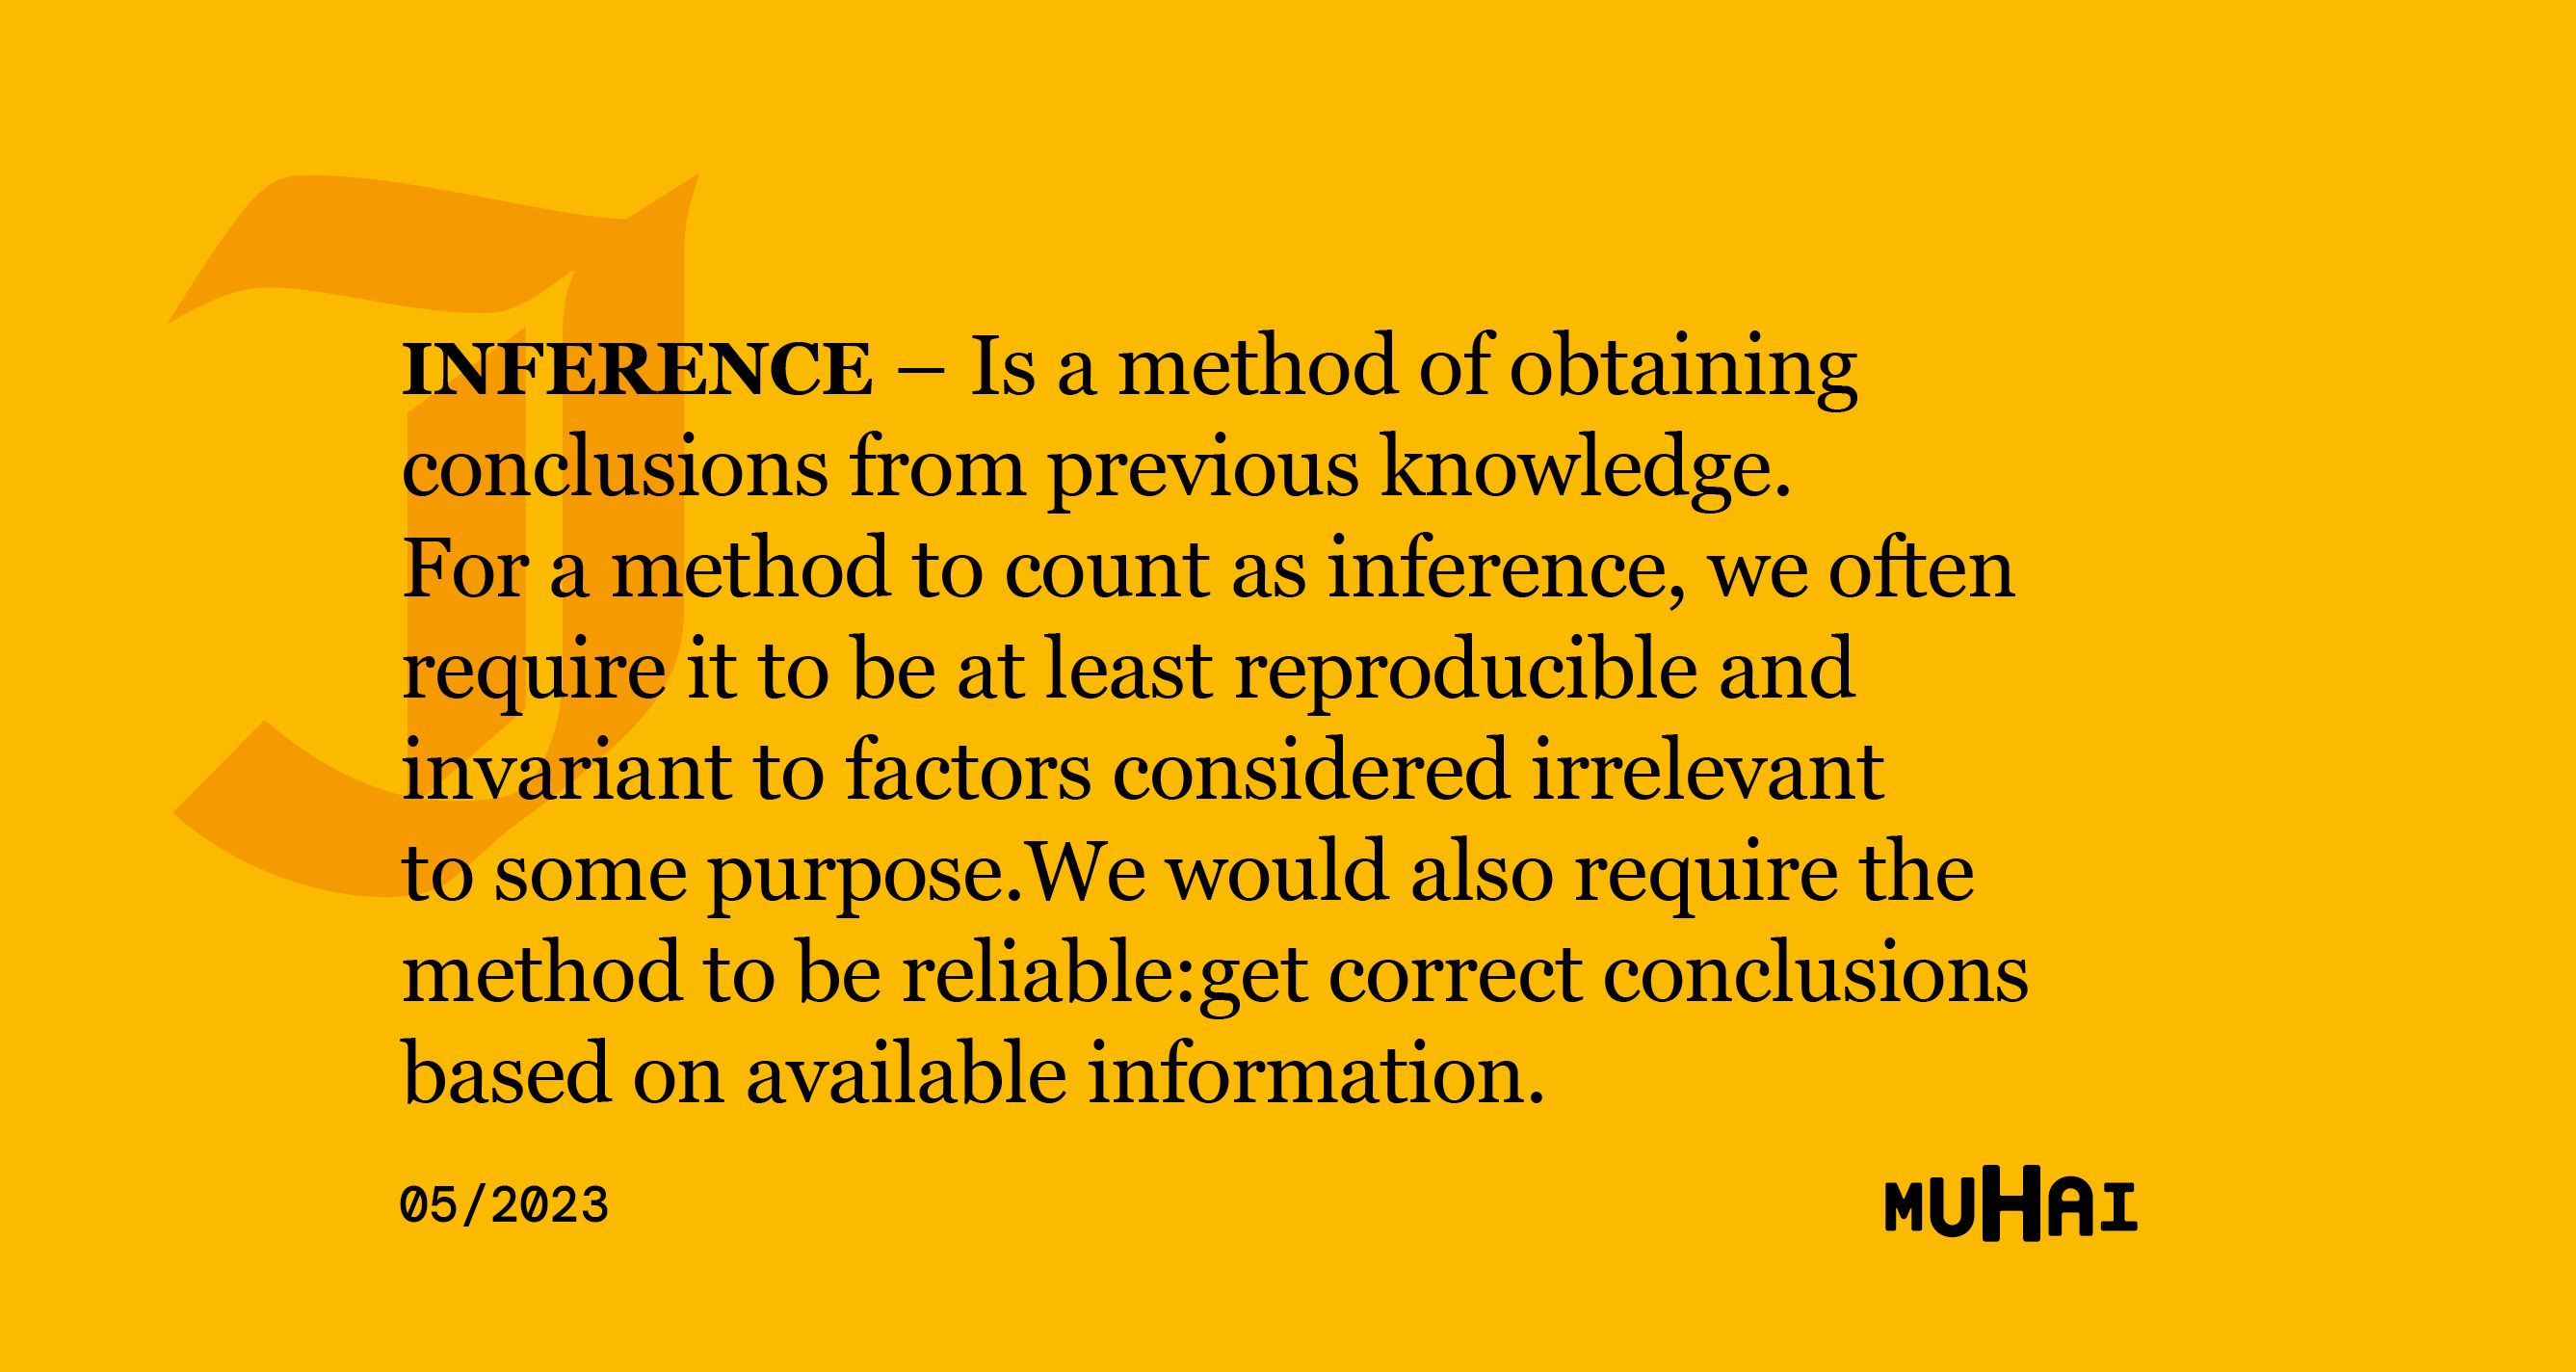 Inference, is a method of obtaining conclusions from previous knowledge. For a method to count as inference, we often require it to be at least reproducible and invariant to factors considered irrelevant to some purpose. We would also require the method to be reliable: get correct conclusions based on available information